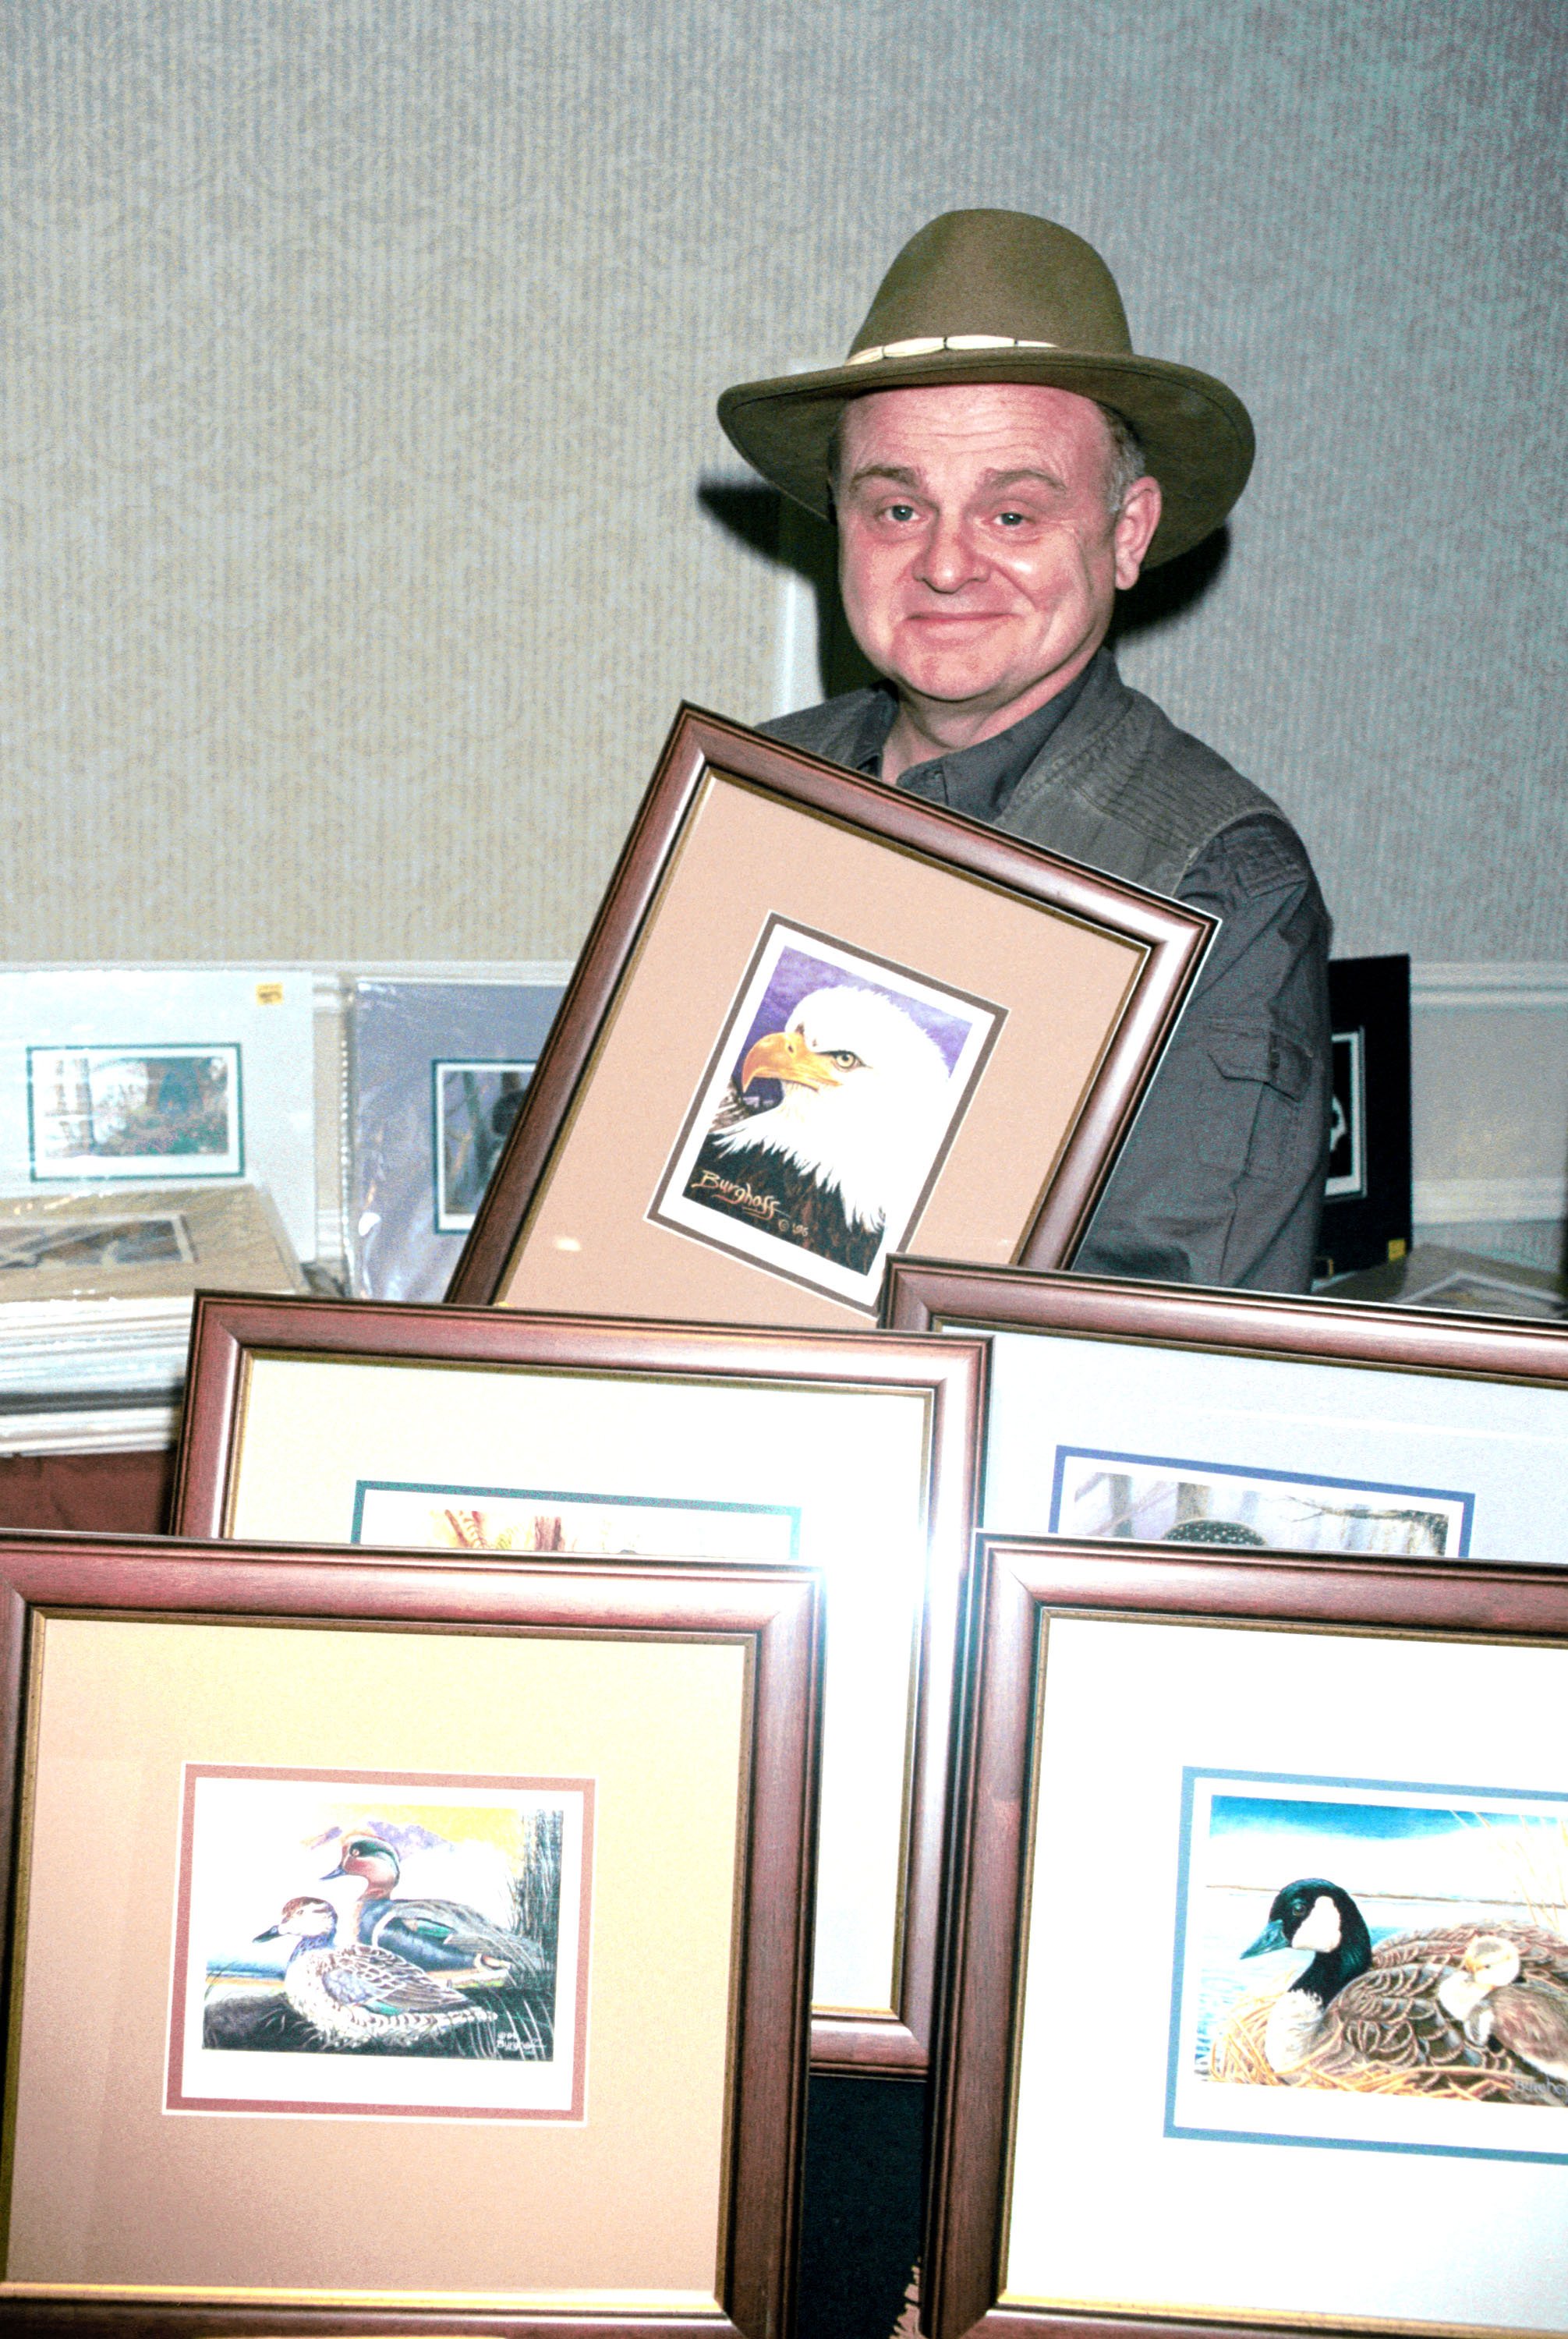 Gary Burghoff at the "Hollywood Collectors and Celebrities Show" April 7, 2001 in North Hollywood.  | Source: Getty Images